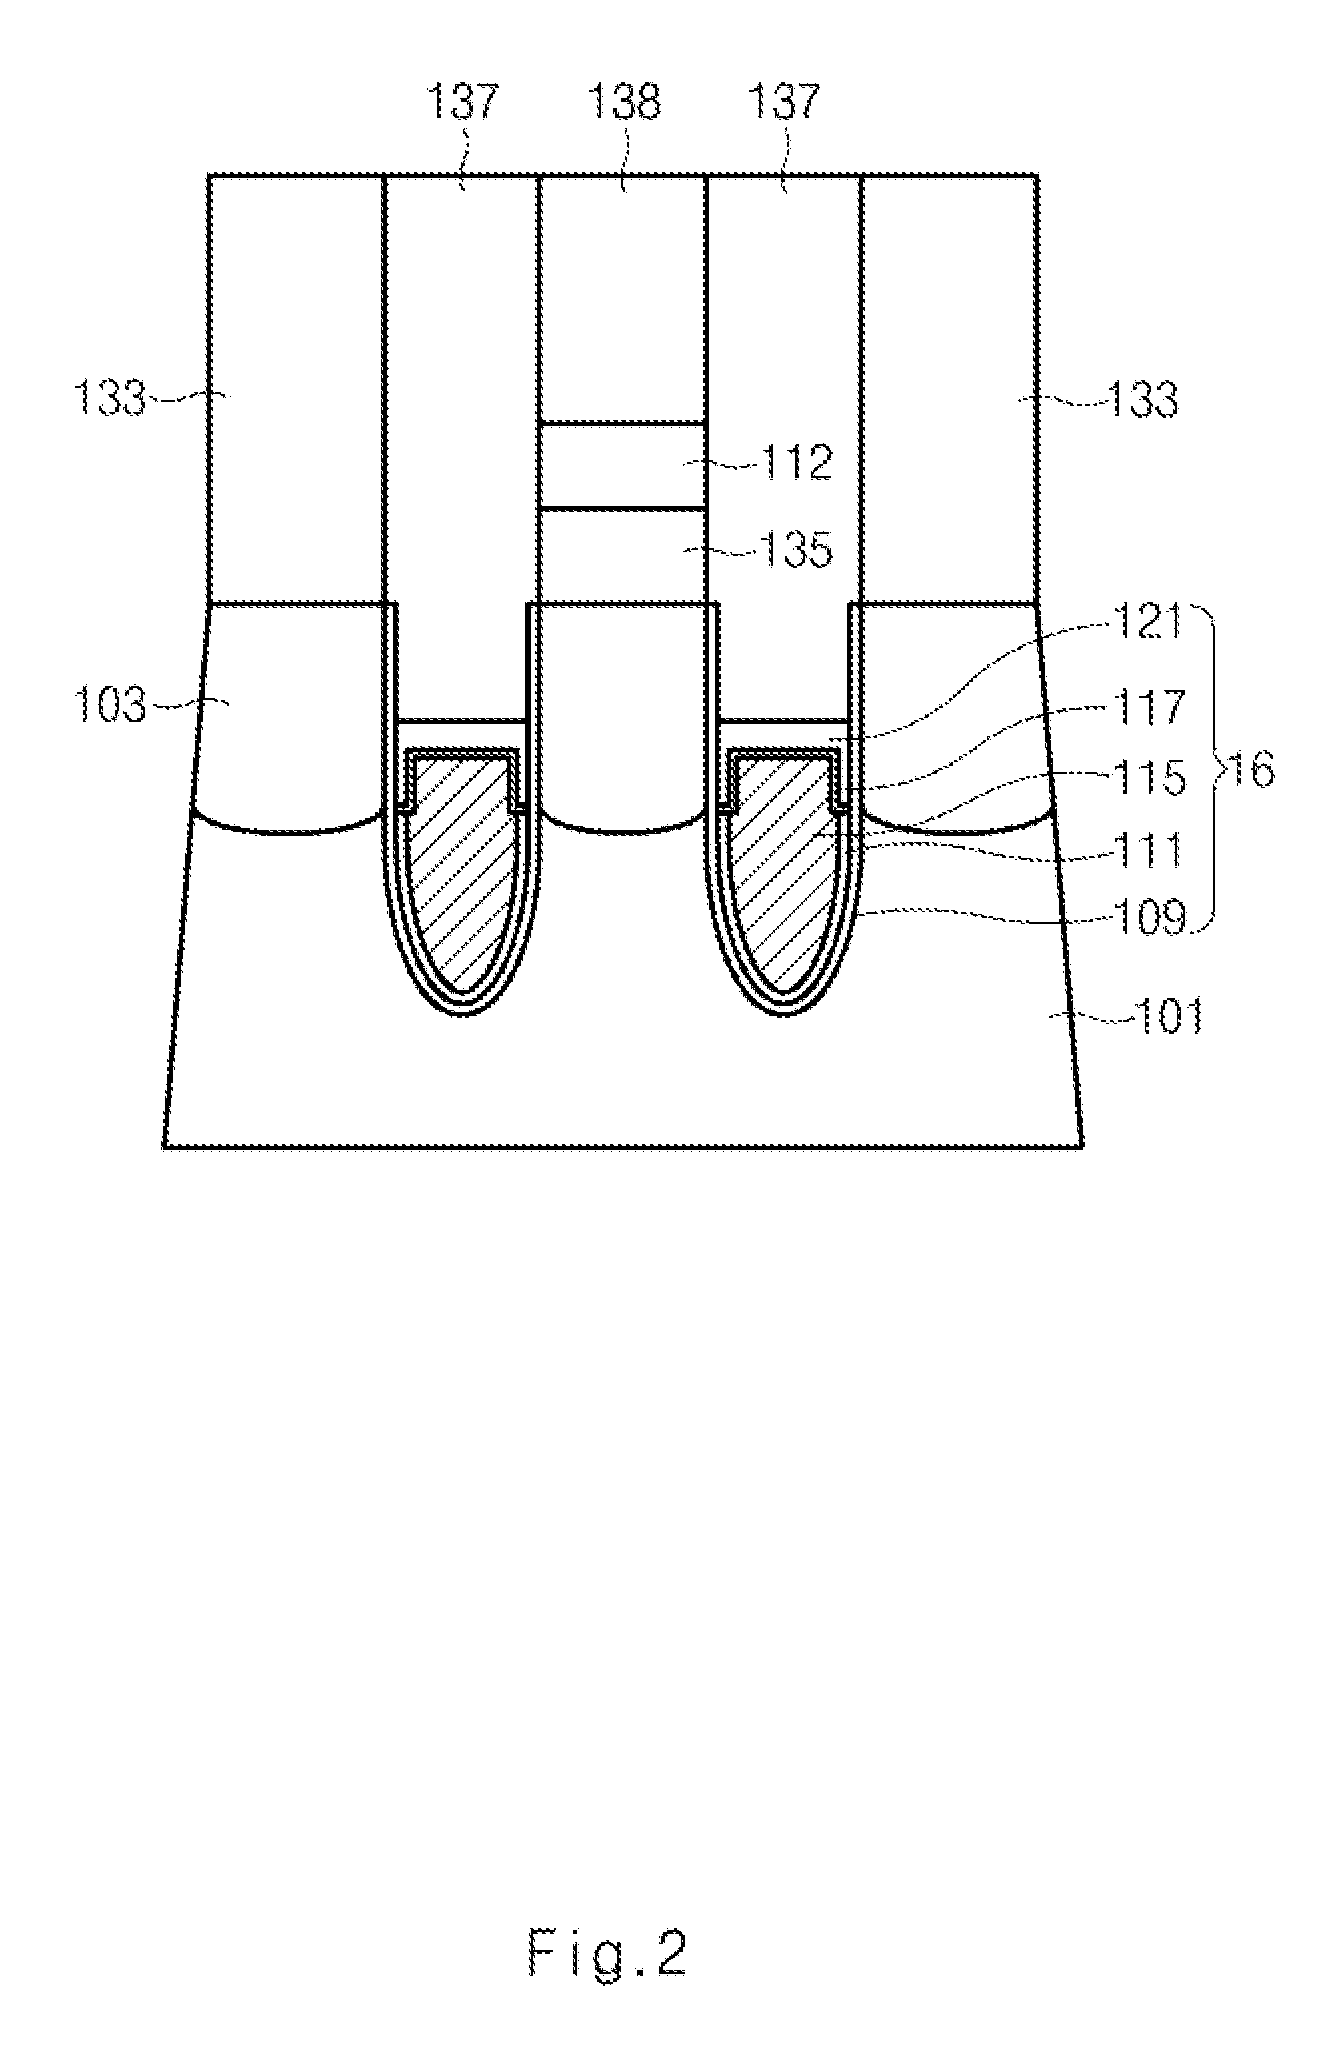 Semiconductor device having buried gate, method of fabricating the same, and module and system having the same